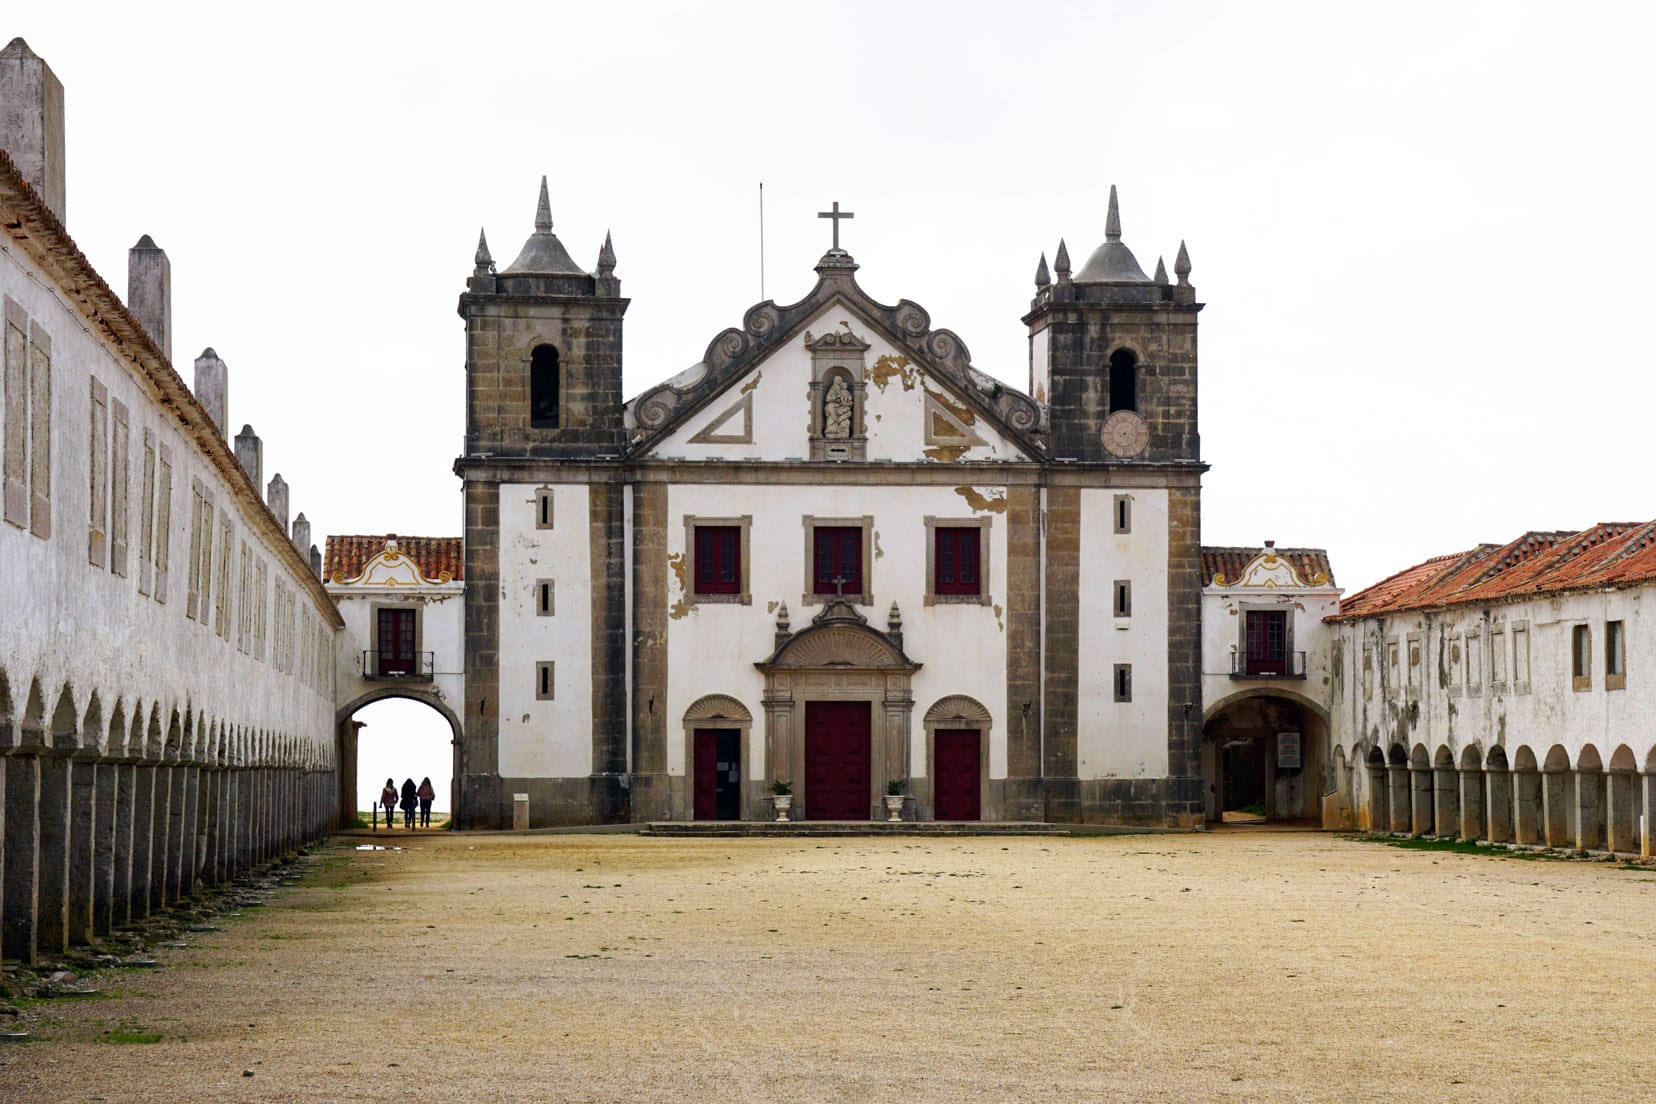 Nossa-Senhorado-Cabo-Church - a white church with red rimmed windows and doors and two long buildings attached